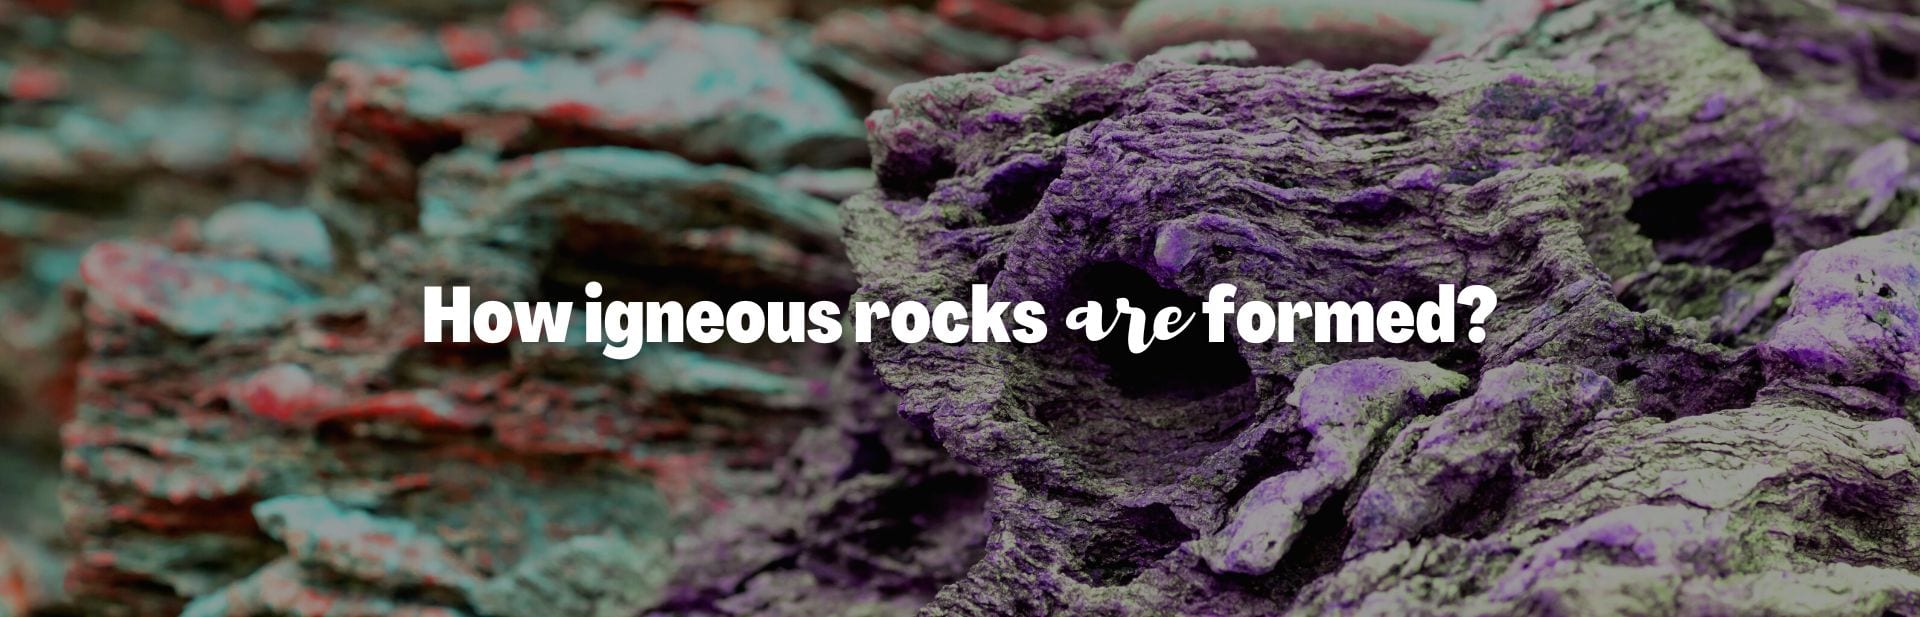 How Are Igneous Rocks formed? The Hot, Grainy Details